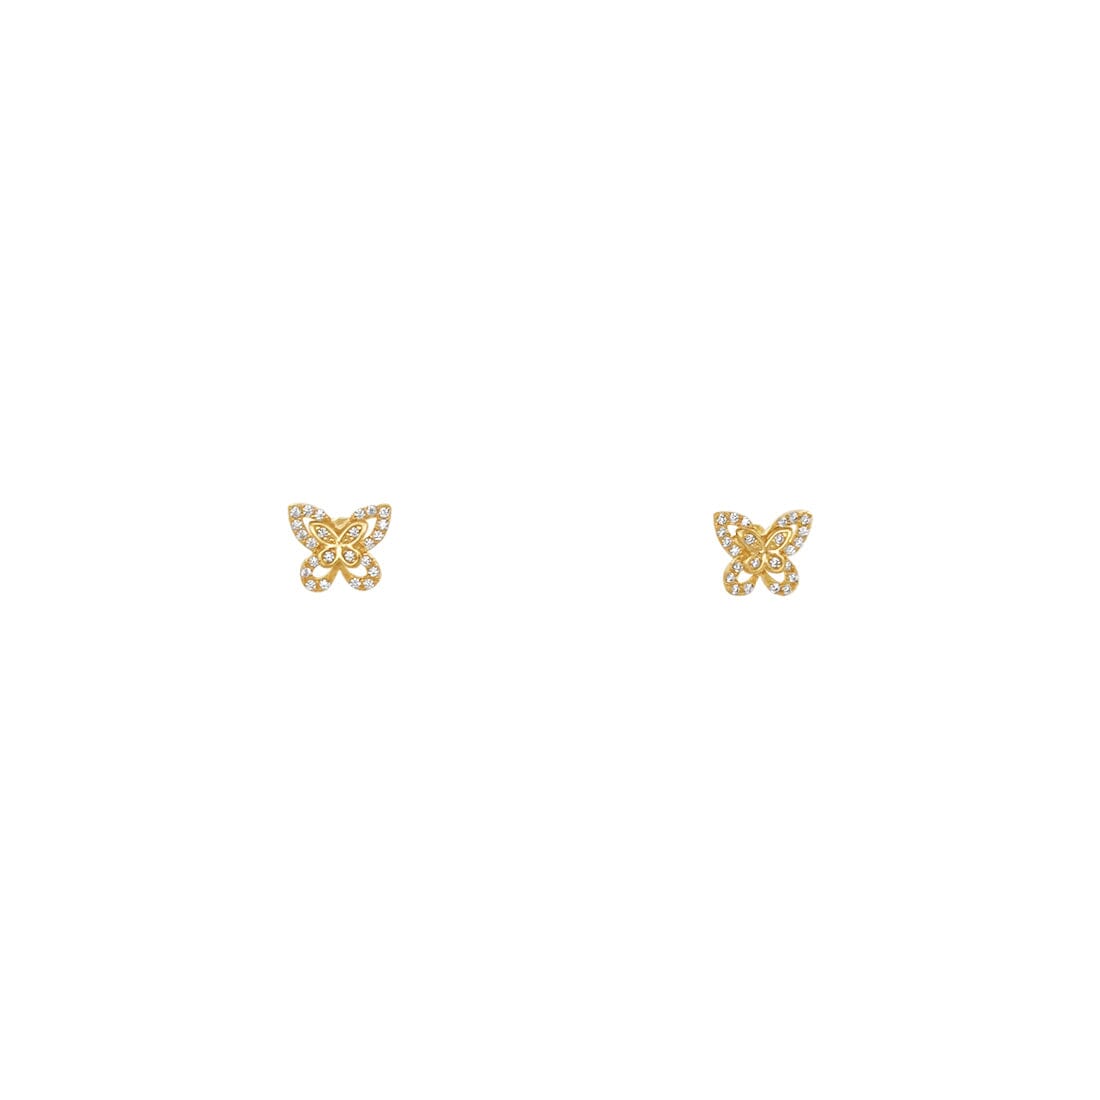 Butterfly Stud Earrings with Cubic Zirconia in 9ct Yellow Gold Earrings Bevilles 